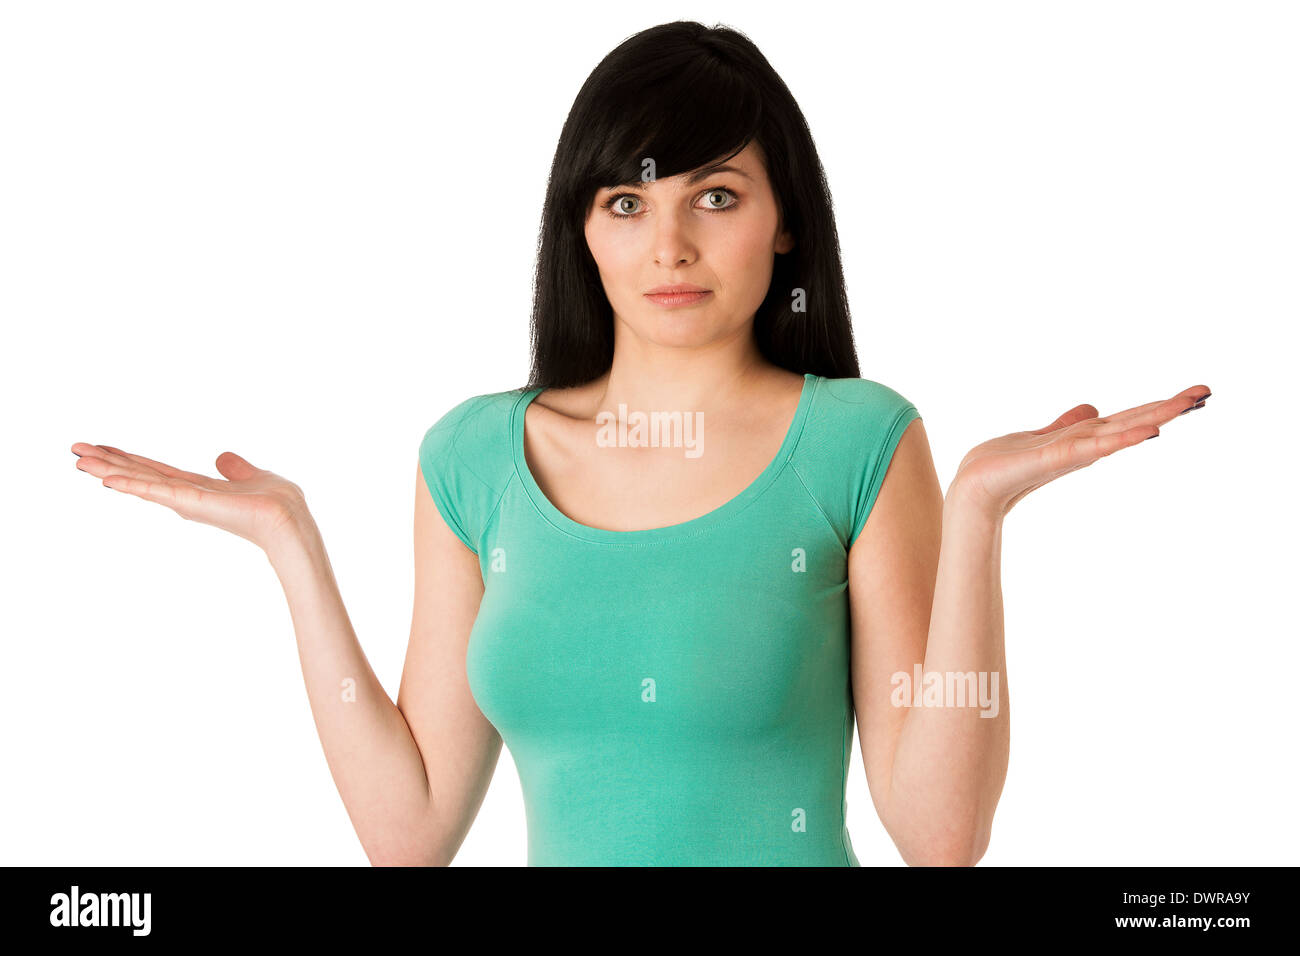 Doubtful uncertain woman isolated over white background Stock Photo